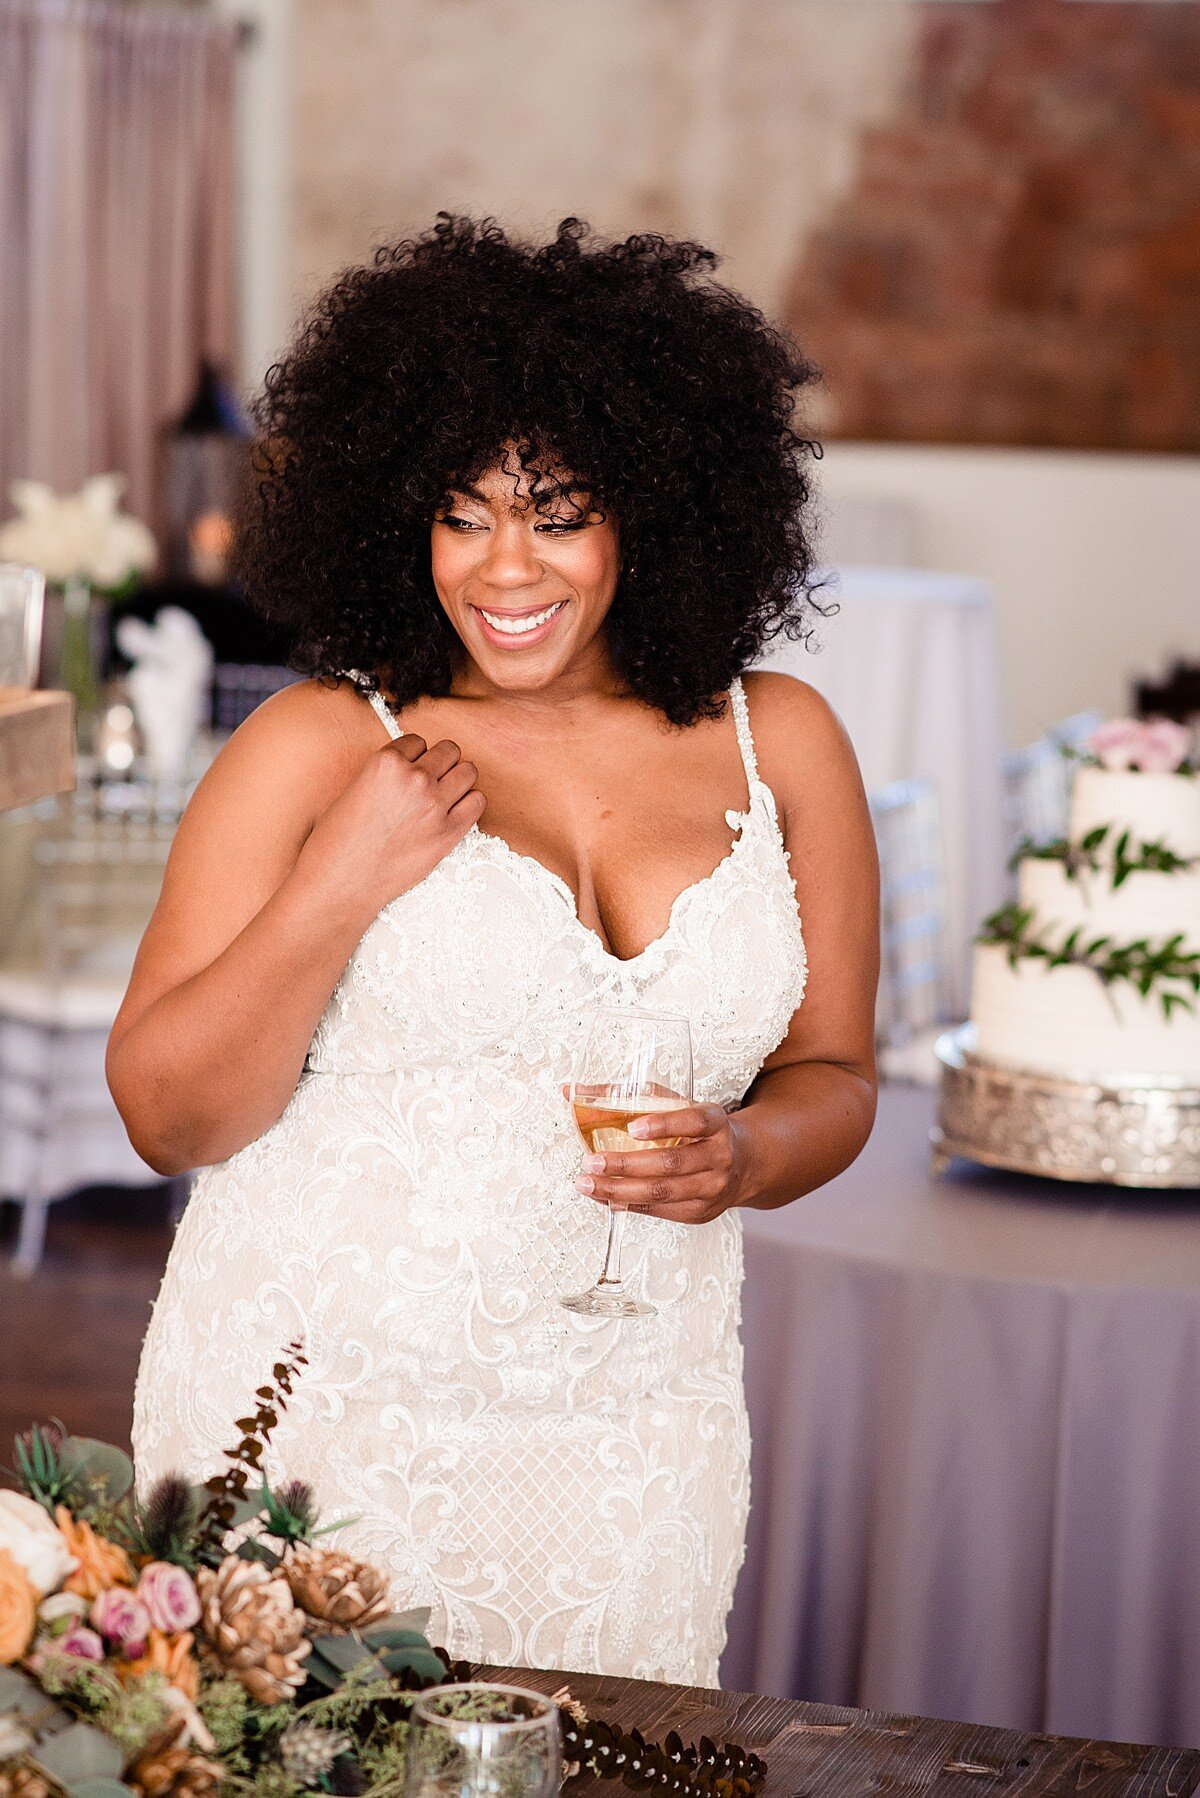 Bride holding a glass of wine wearing a lace wedding dress with thin straps at reception